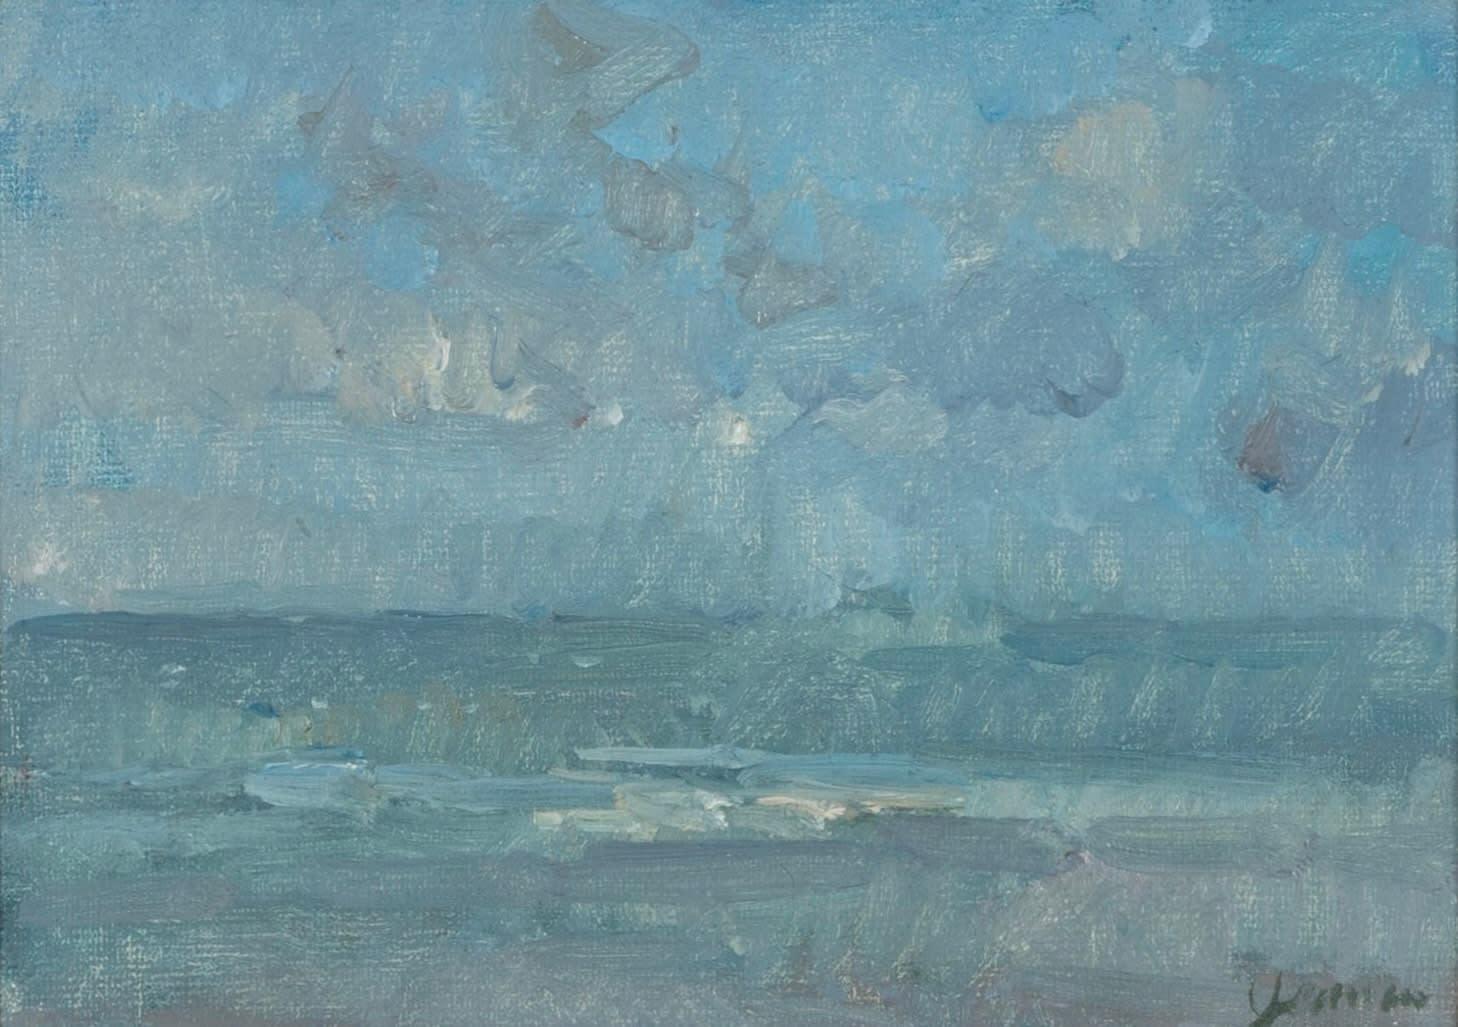 Oil on Board 'Seascape' Painting by Martin Yeoman B. 1953

Additional information:
Medium: Oil on board
Dimensions: 12.5 x 17 cm
4 7/8 x 6 3/4 in
Signed

Martin Yeoman was born in 1953, and studied with Peter Greenham at the Royal Academy Schools,